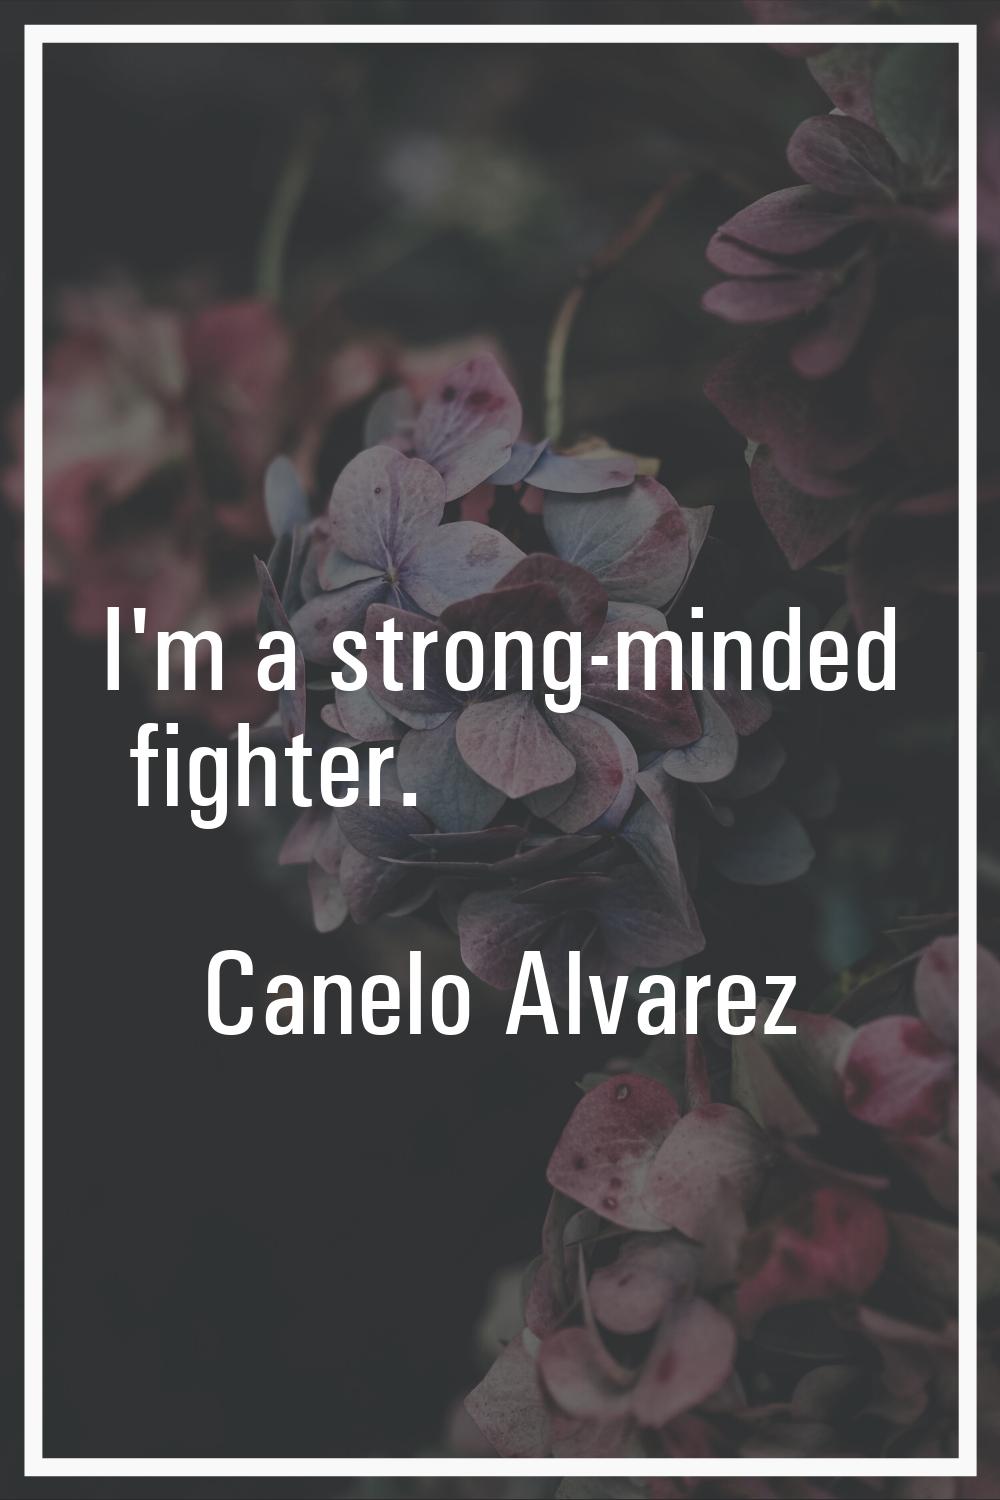 I'm a strong-minded fighter.